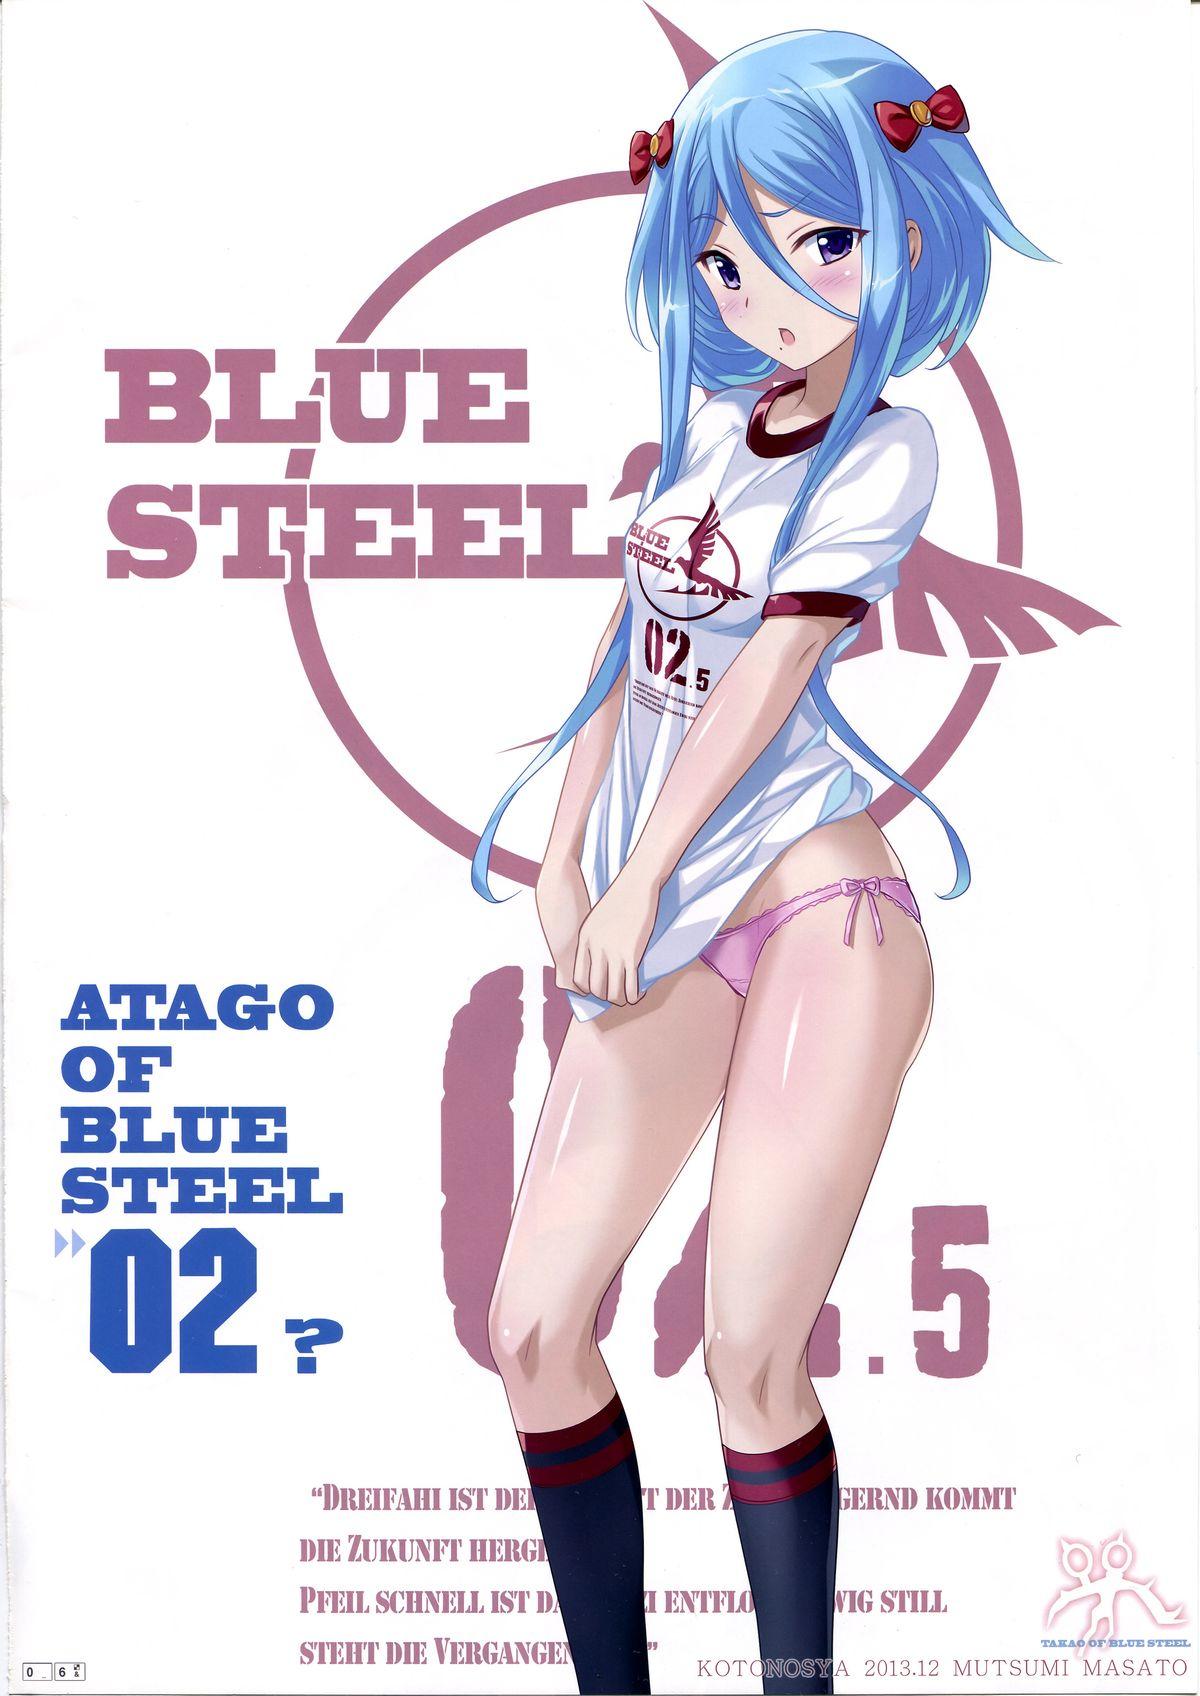 Hot Girl Pussy TAKAO OF BLUE STEEL 02 - Arpeggio of blue steel Big Booty - Page 5